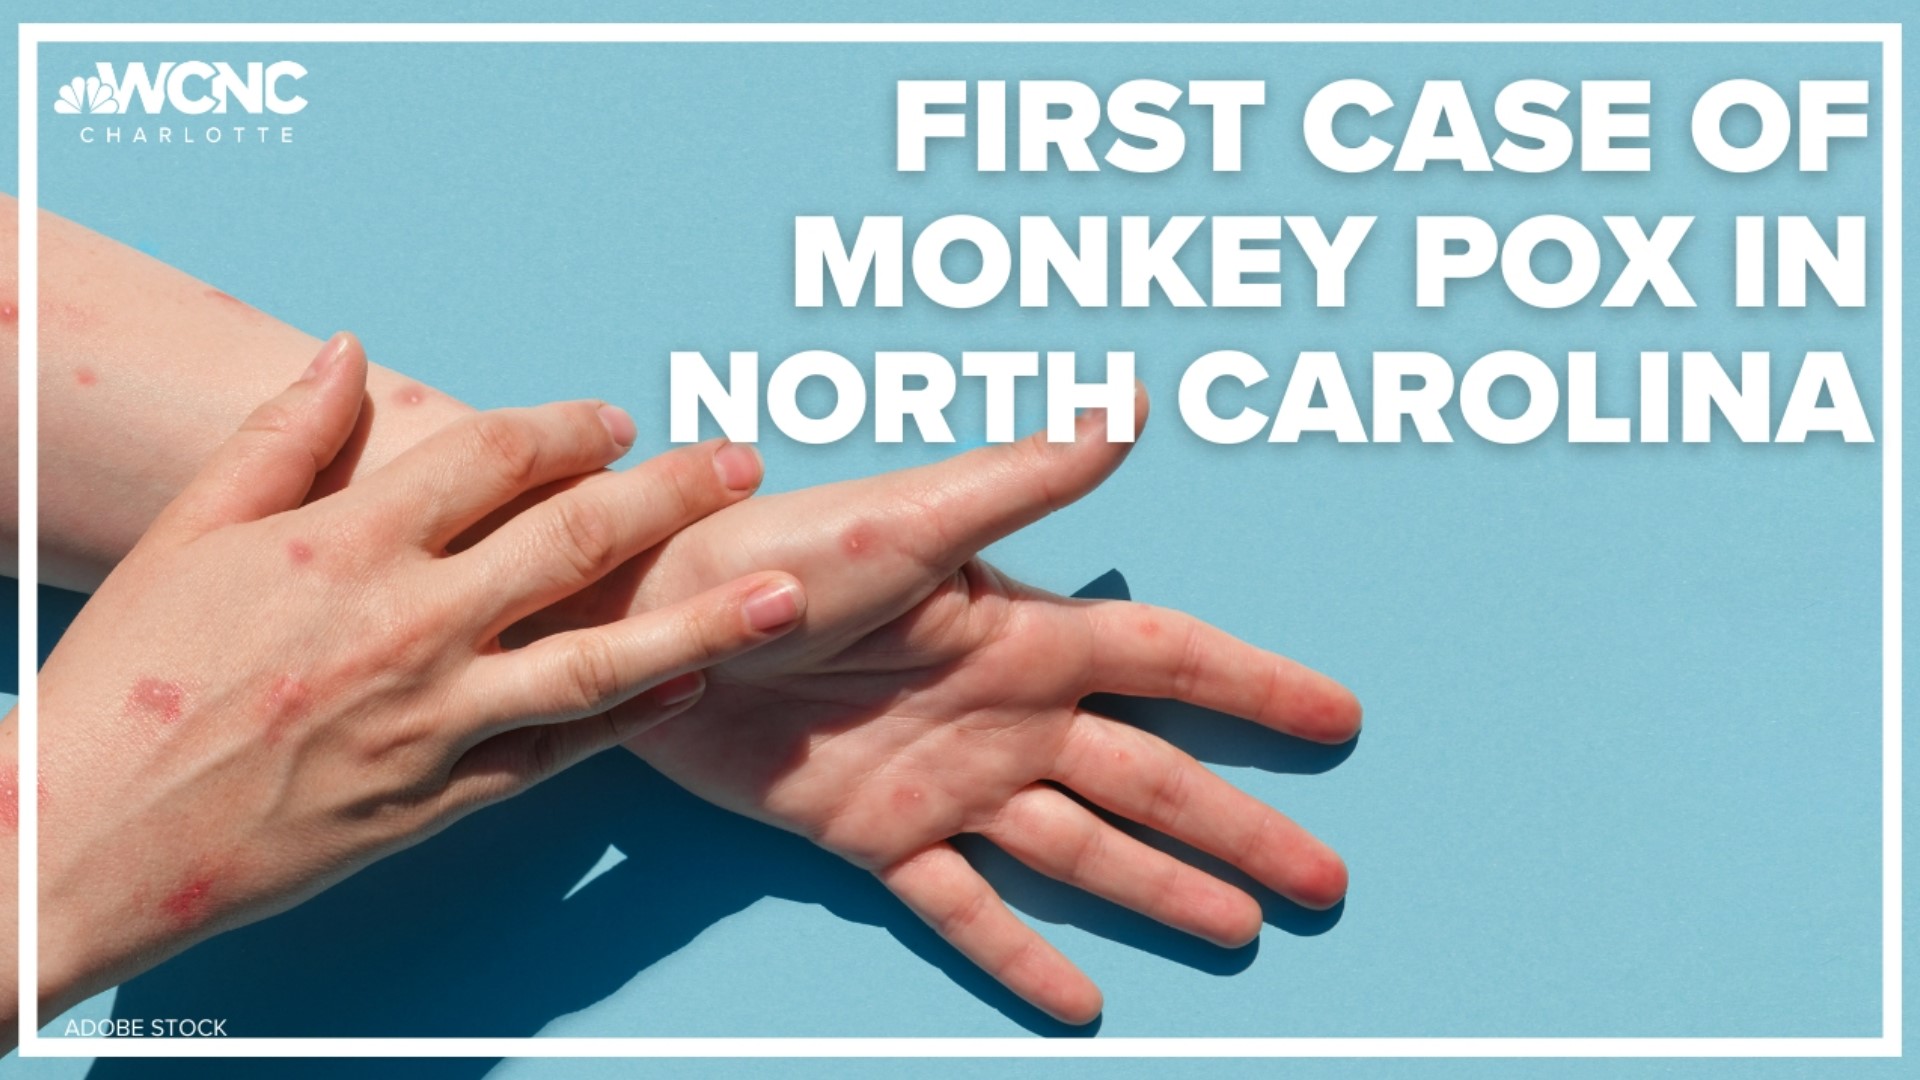 The State Department of Health and Human Services reports first case of Monkeypox in North Carolina today.